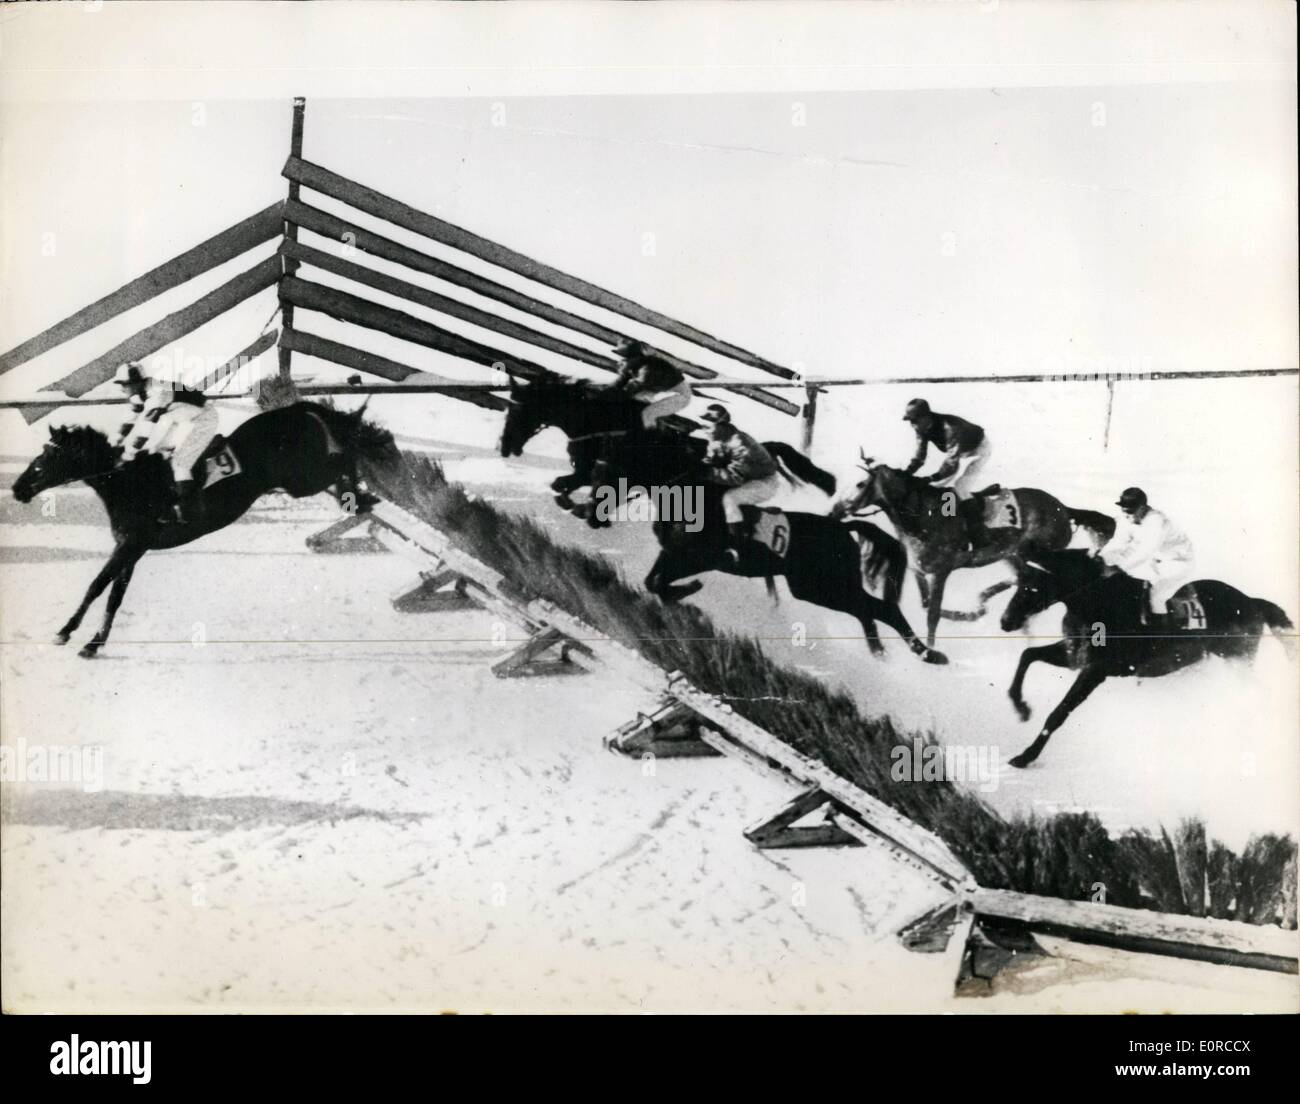 Jan. 01, 1959 - Racing across the snow - at arose - Switzerland: The field takes a hurdle during the snow racing for the ''Prize of Reetia'' - at Arosa, Switzerland. Leading is ''Torrigan'' who came in fifth; and then L-R; ''Prevete'' the winner; ''Fritta'' - ''Psyche II'' and ''Le Trouvere' Stock Photo